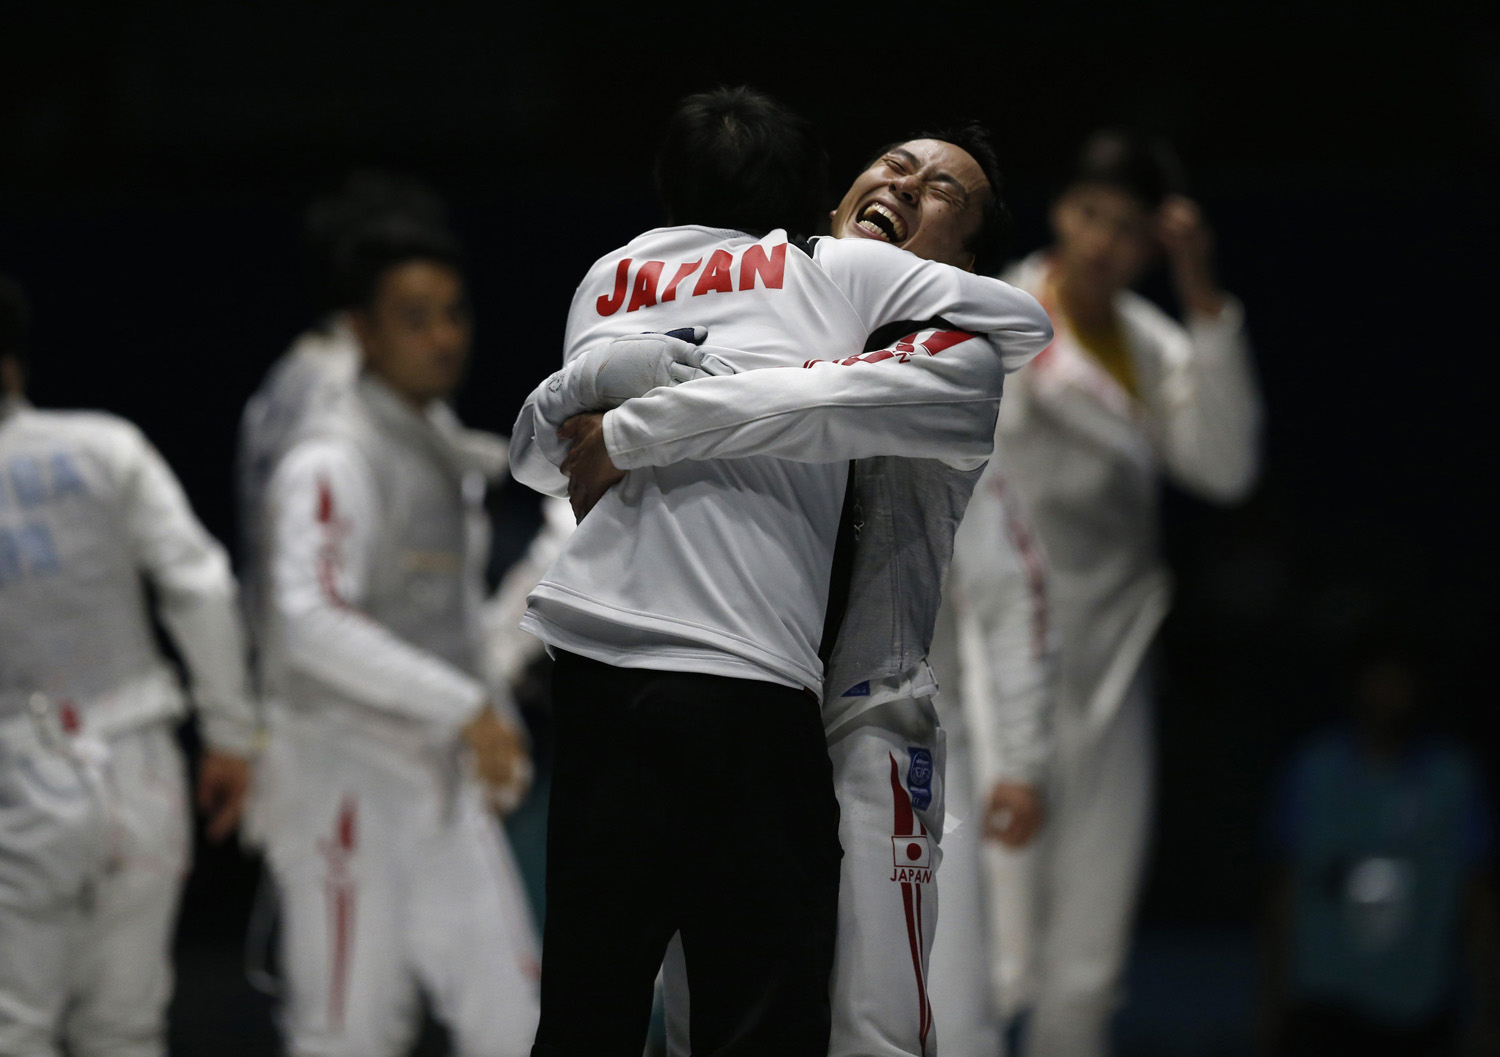 Japan's Ota celebrates with team member after winning their men's foil team fencing competition final against China at Goyang Gymnasium during the 17th Asian Games in Incheon